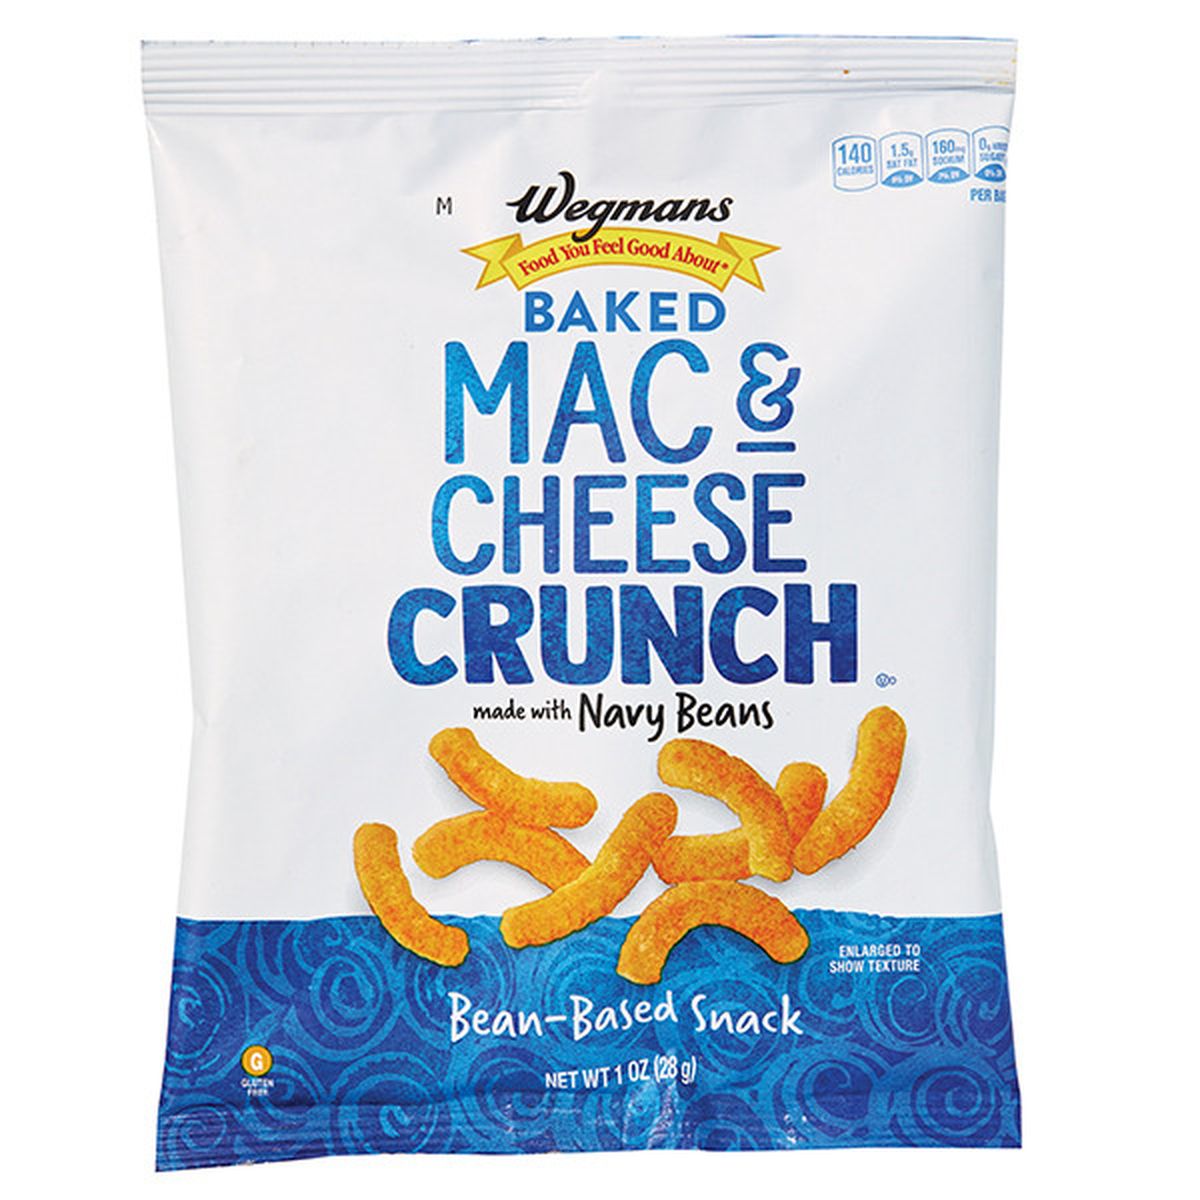 Calories in Wegmans Baked Mac & Cheese Crunch Made with Navy Beans, Bean Based Snack